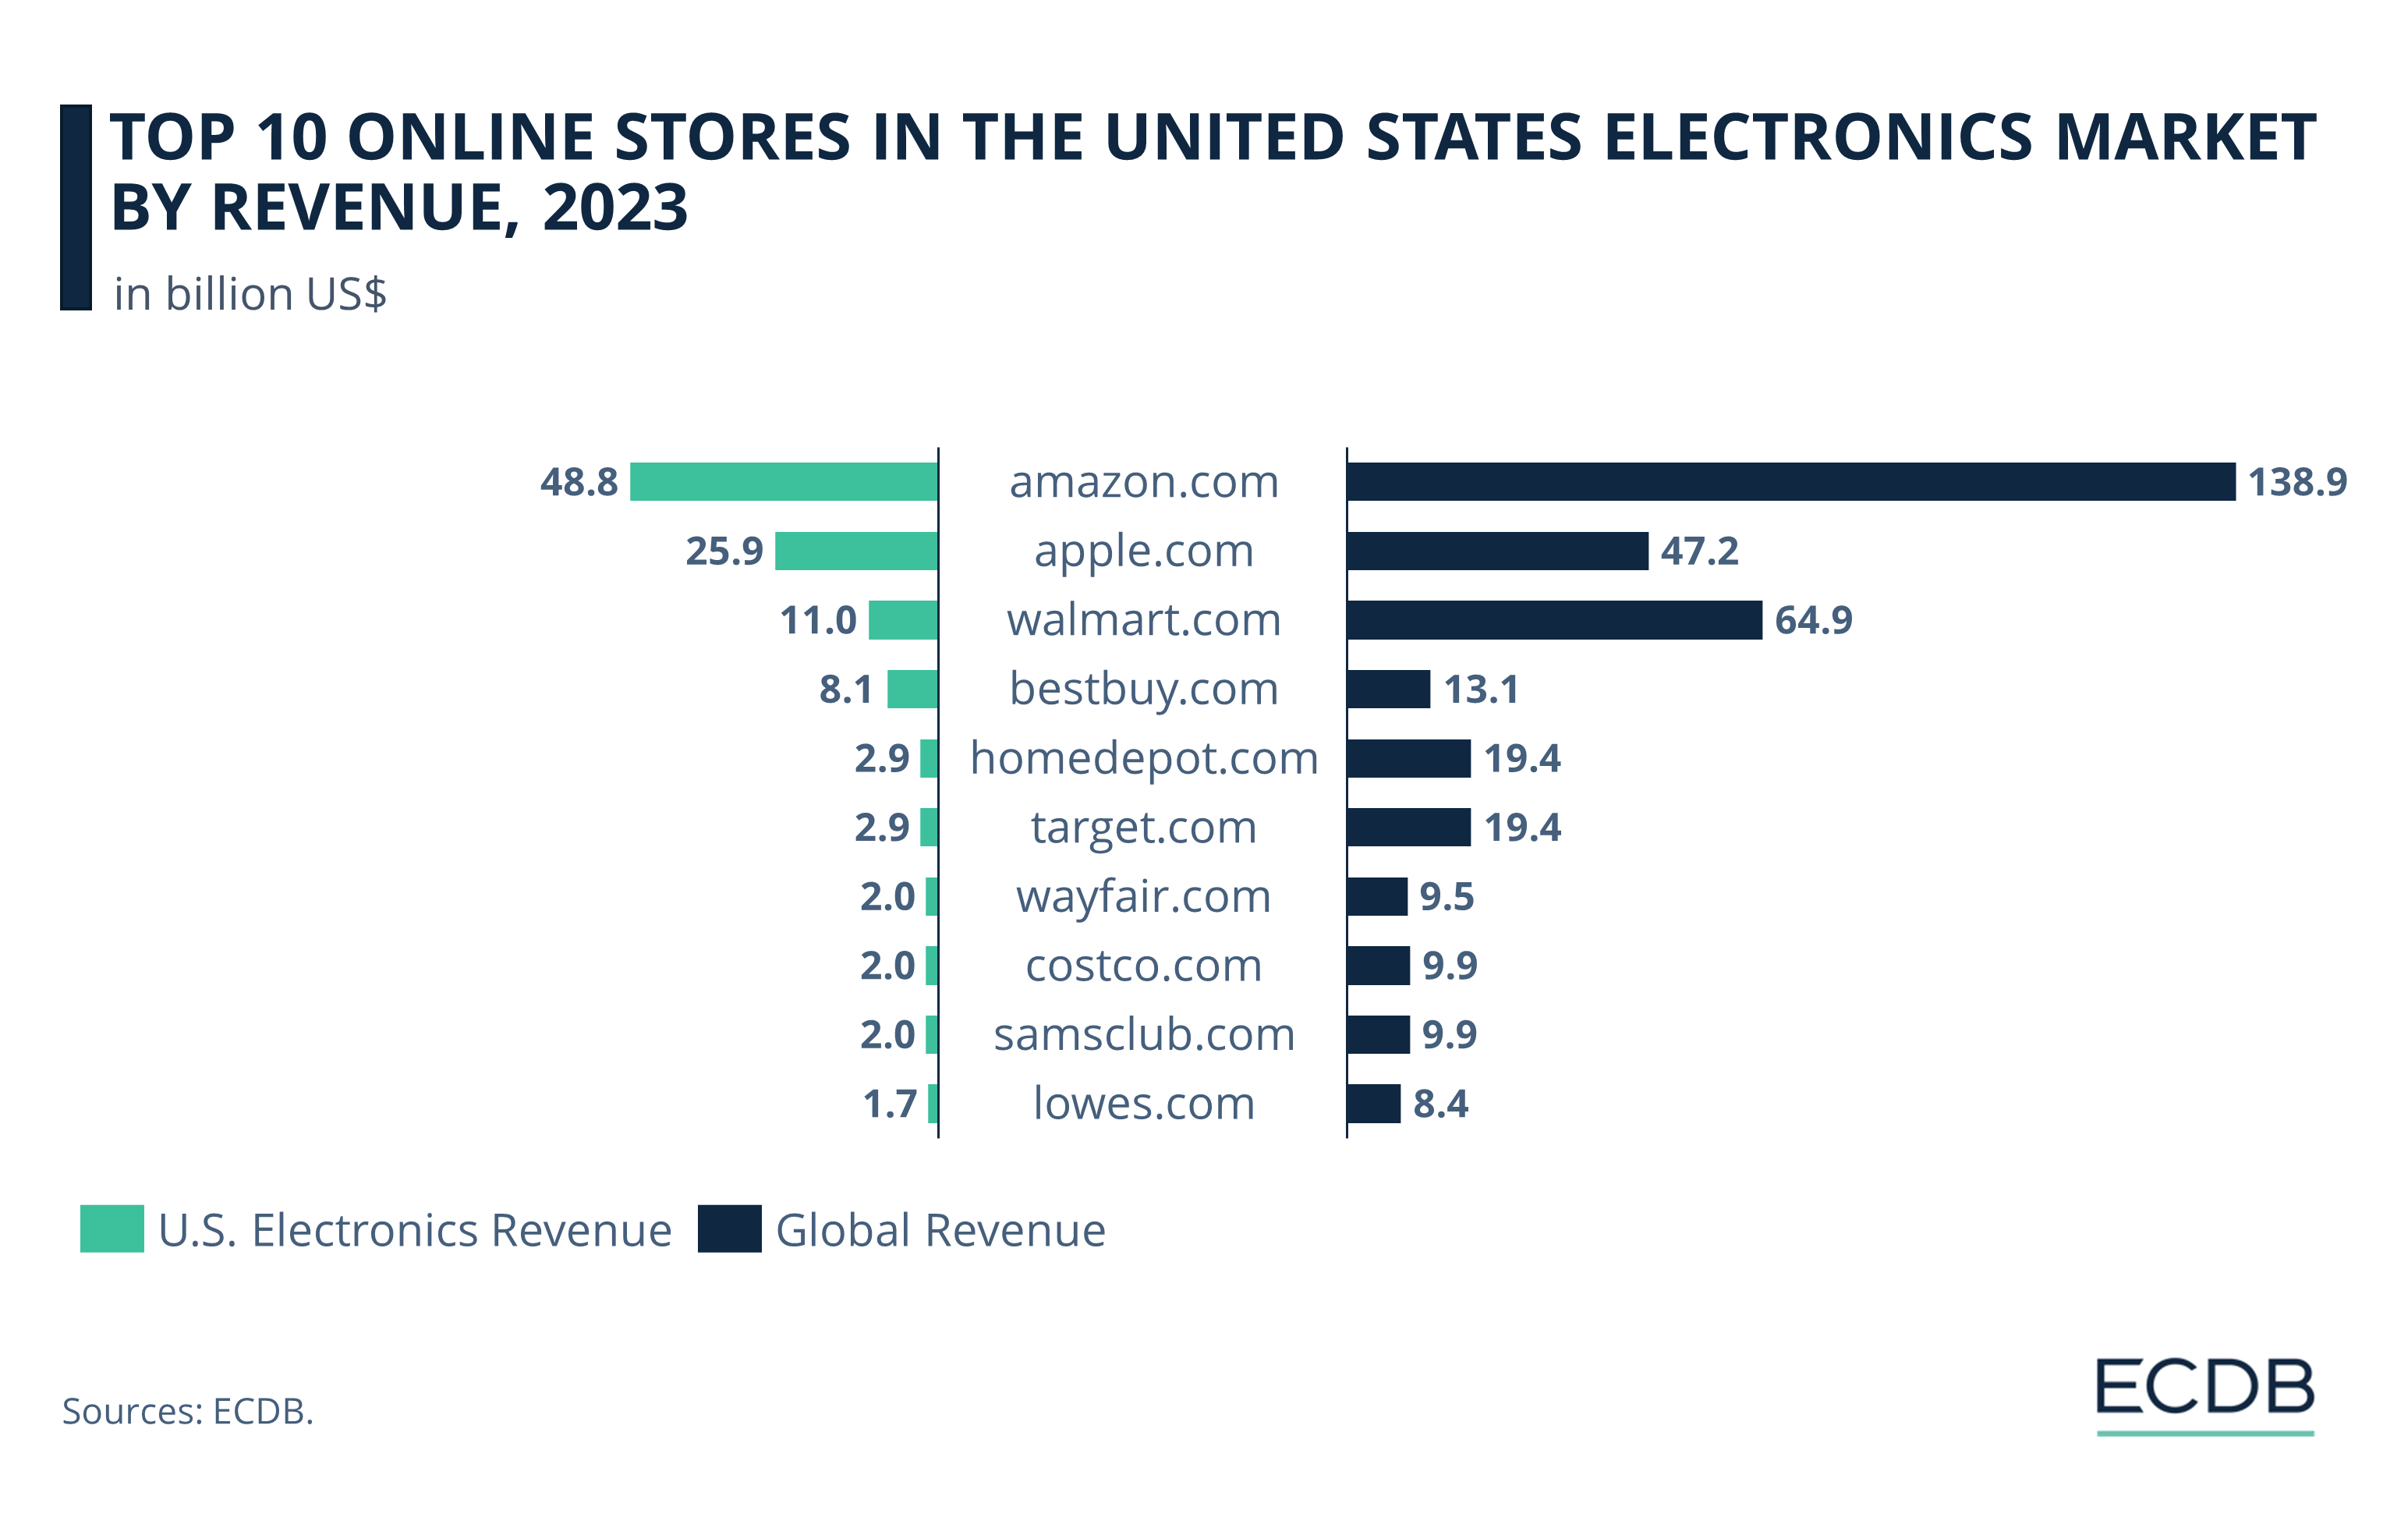 Top 10 Online Stores in the United States Electronics Market by Revenue, 2023